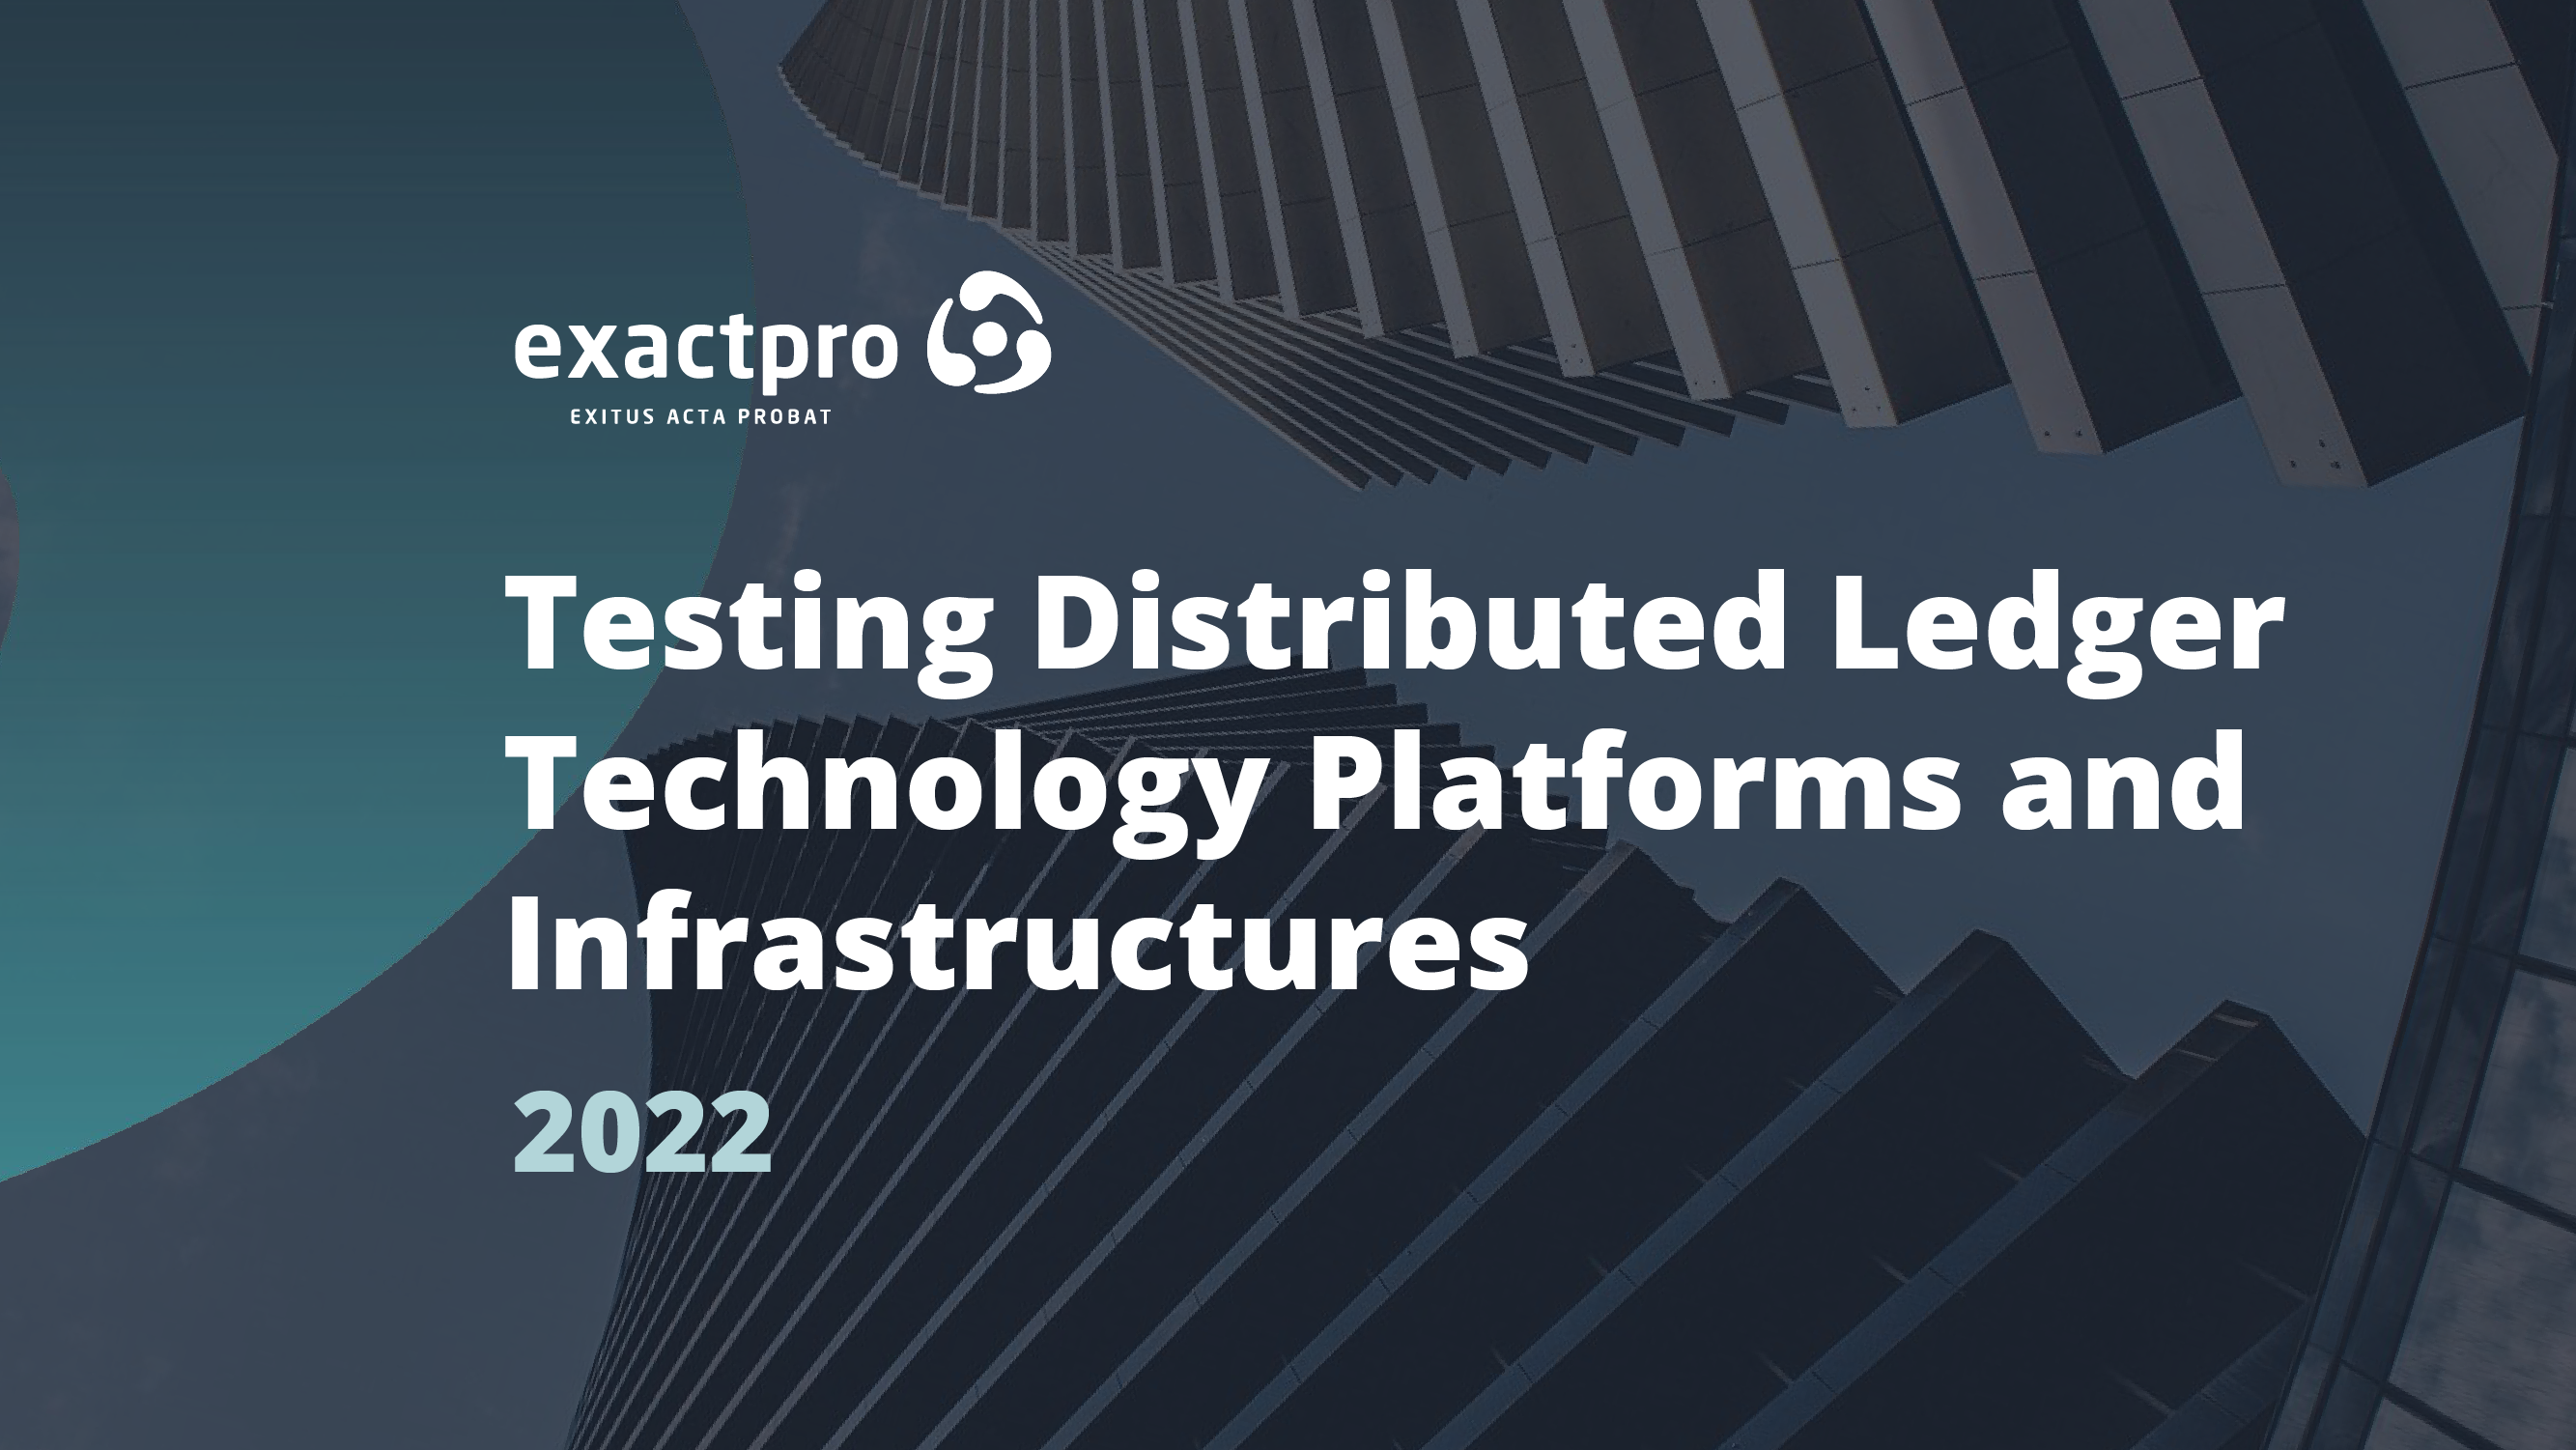 Testing Distributed Ledger Technology Platforms and Infrastructures